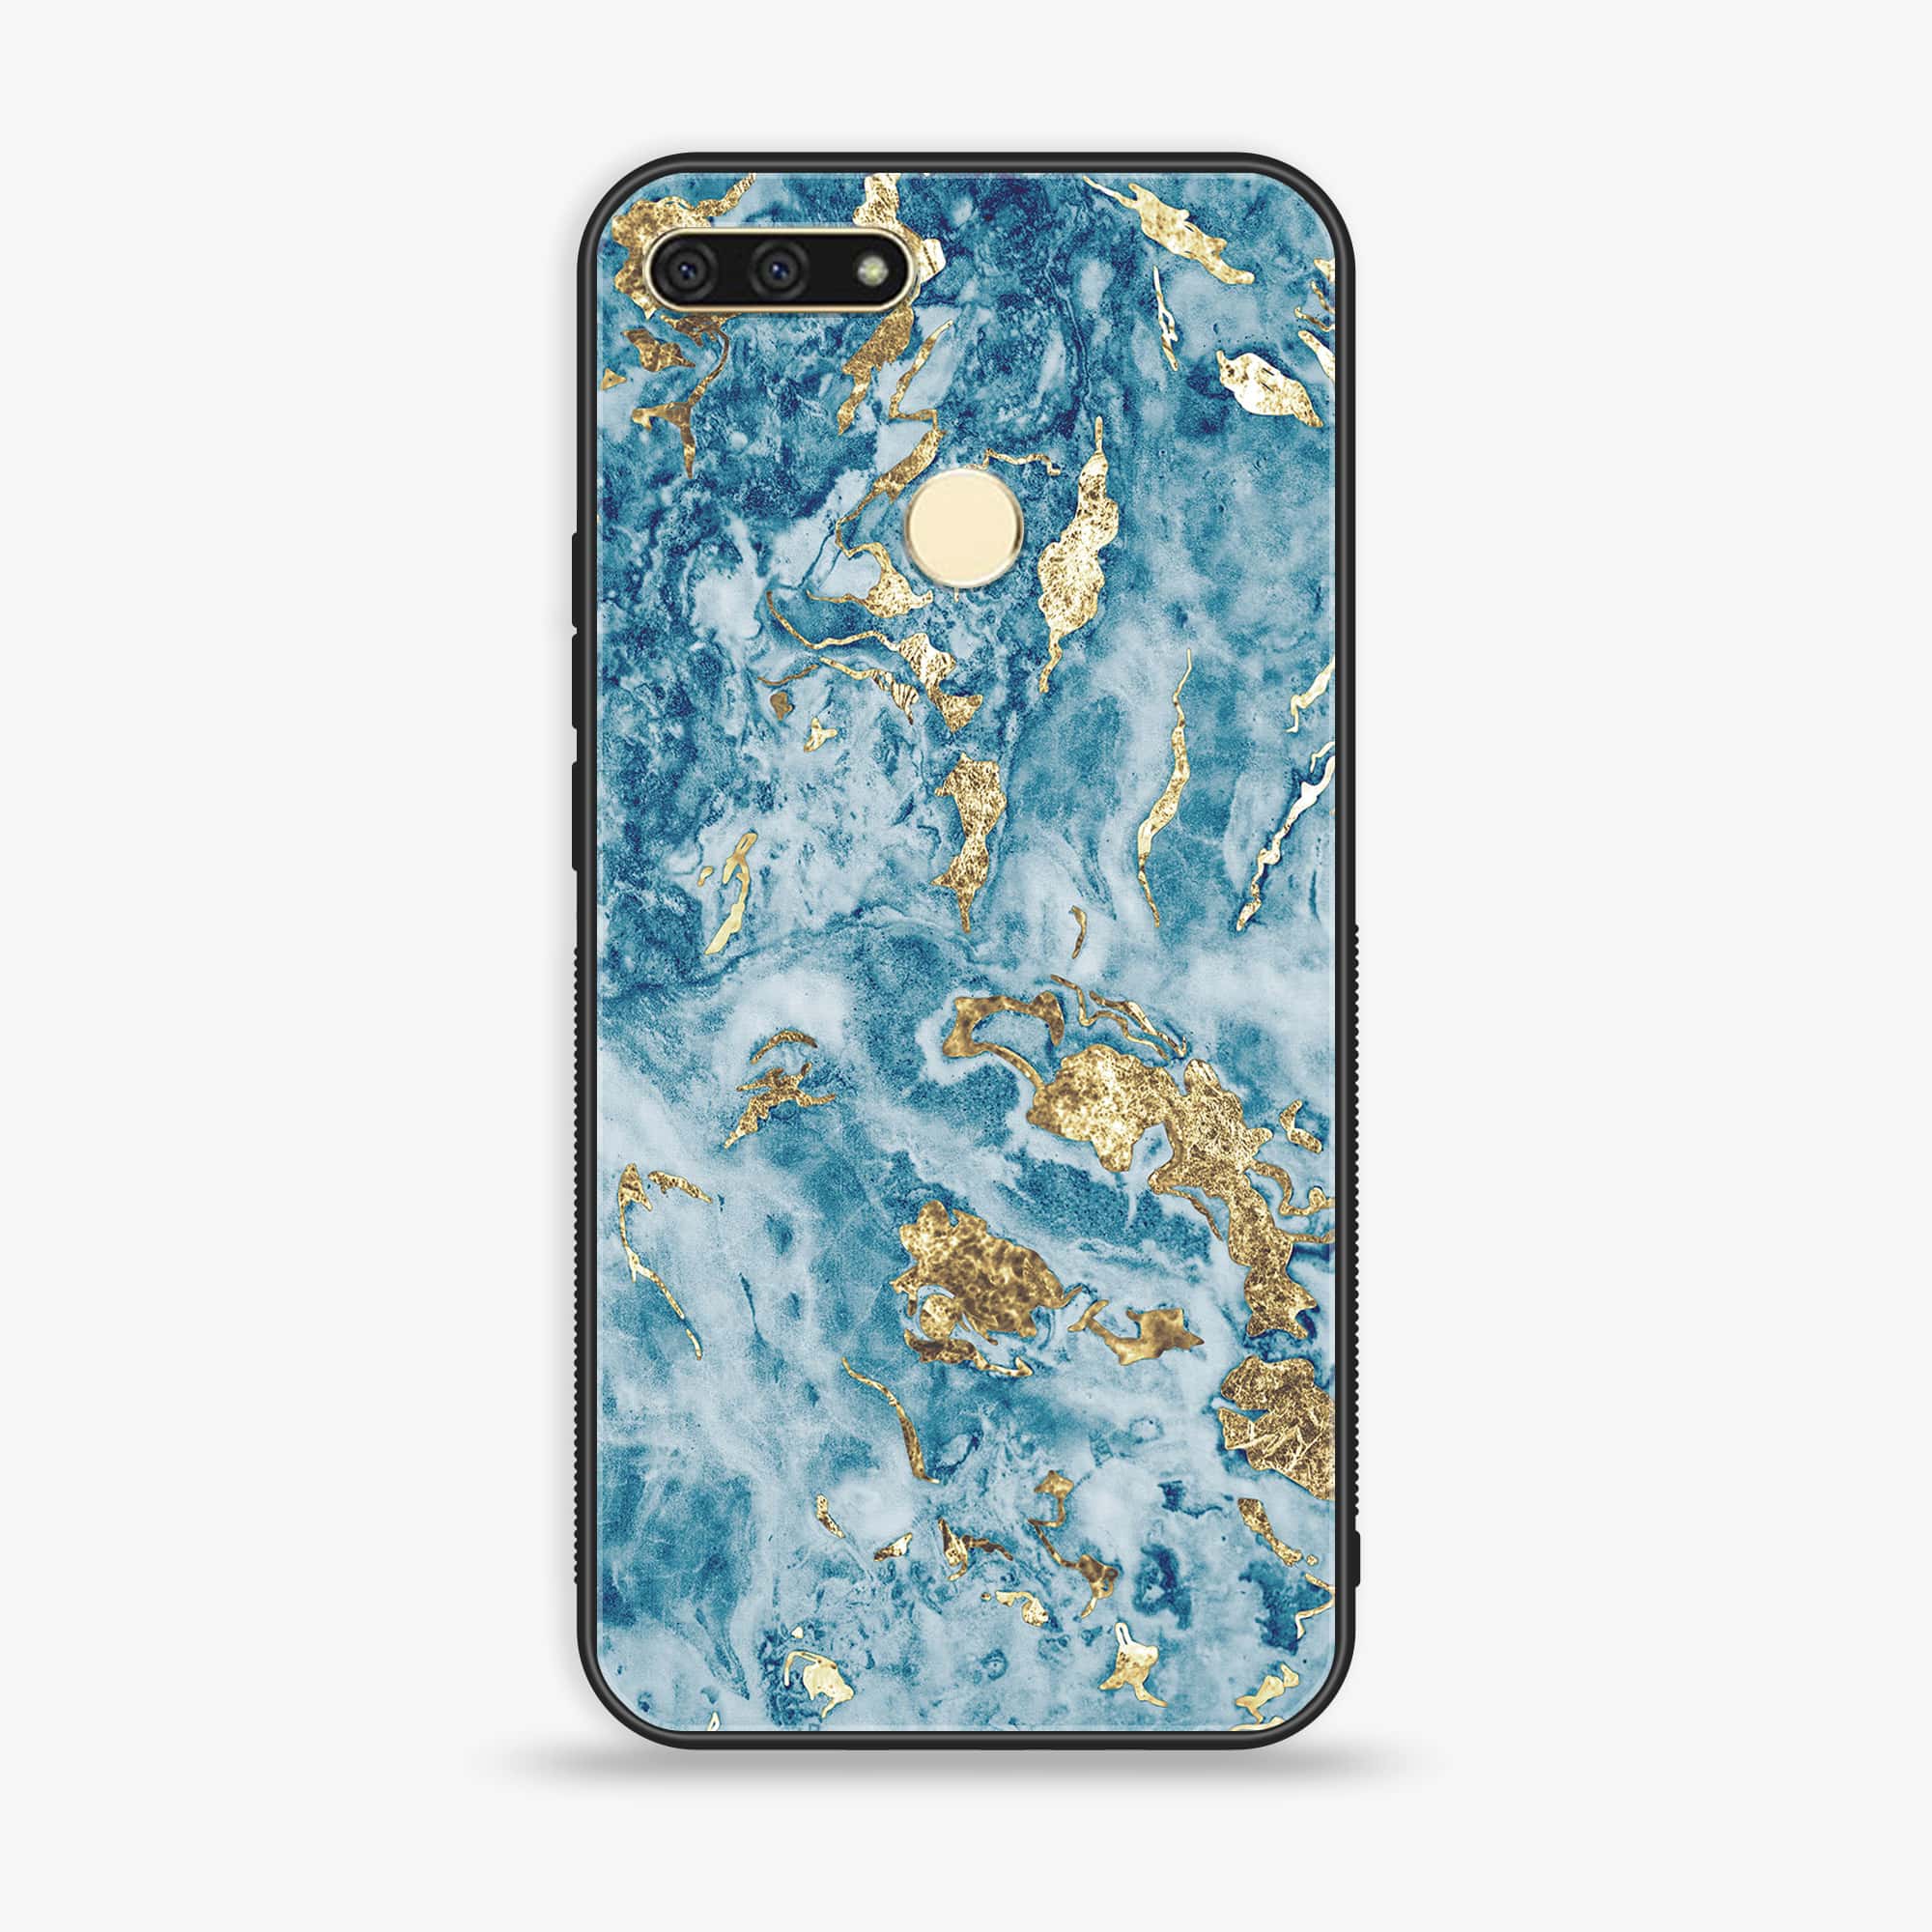 Huawei Y6 2018/Honor Play 7A - Blue Marble Series V 2.0  - Premium Printed Glass soft Bumper shock Proof Case